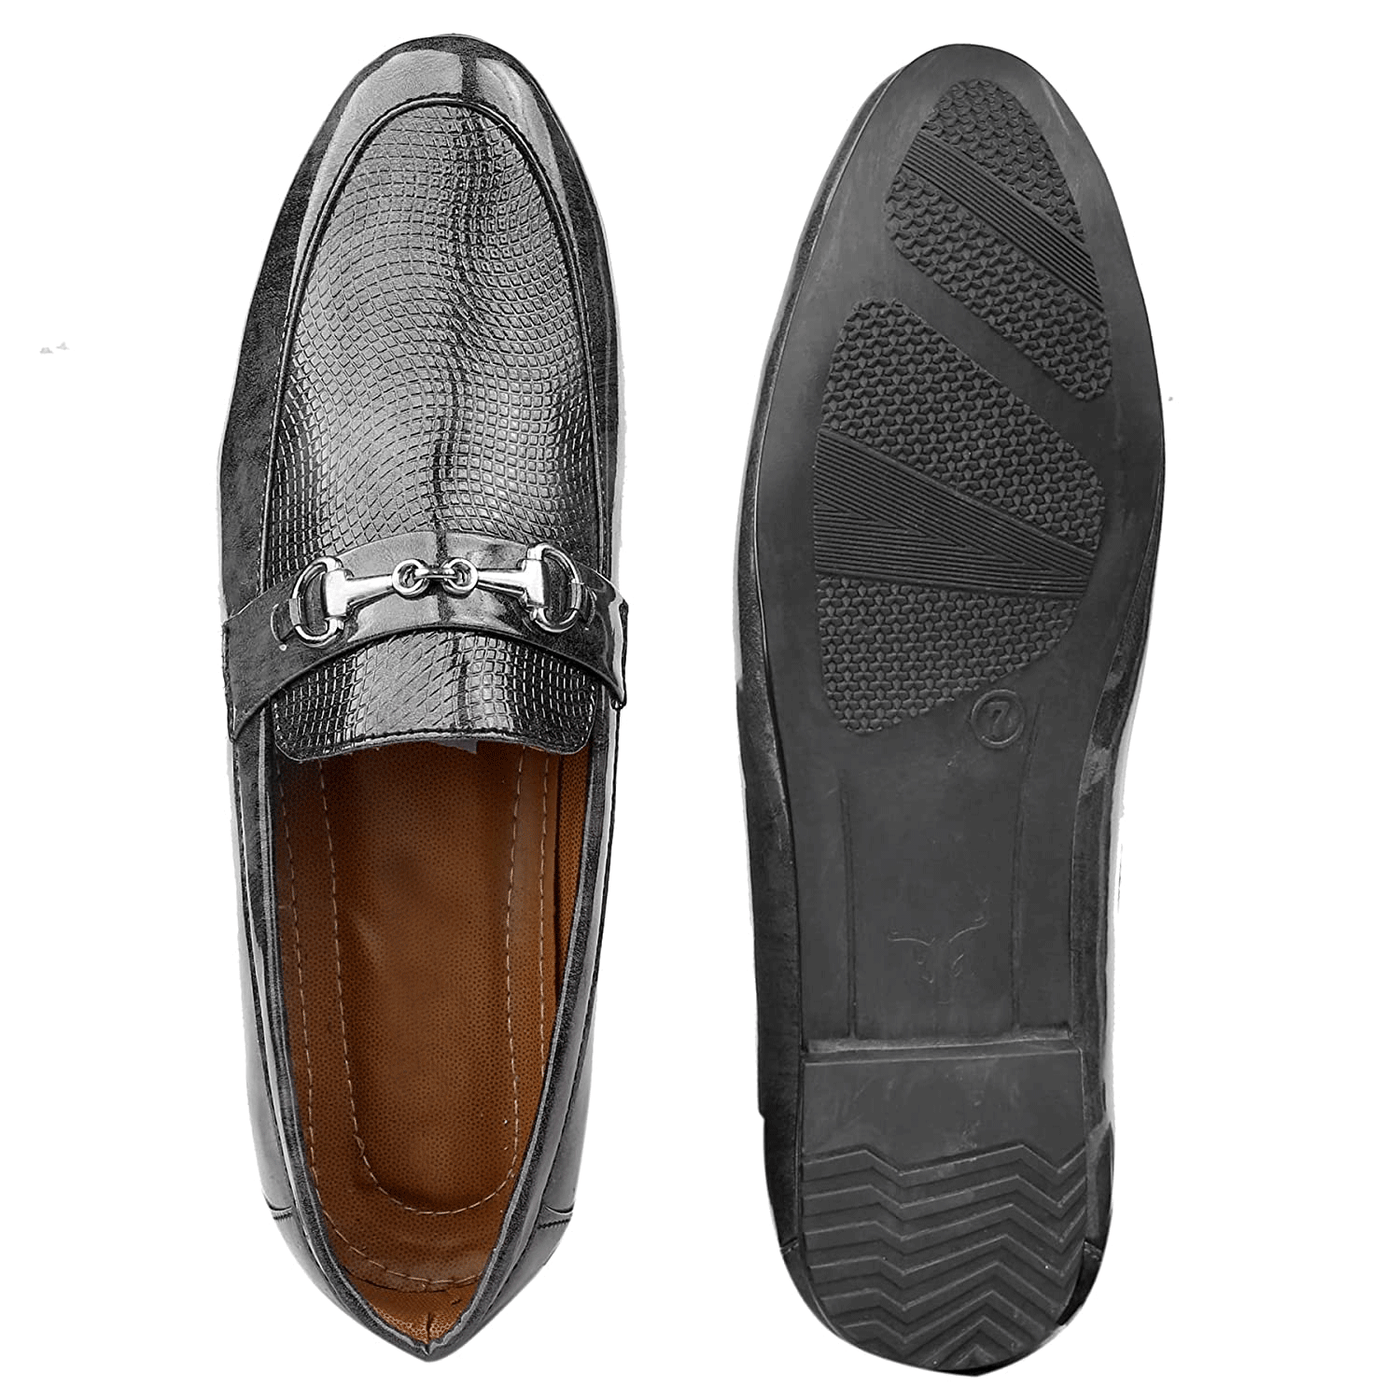 Stylish Casual And Party Wear Casual Slip-on Shoes For Men-Unique and Classy